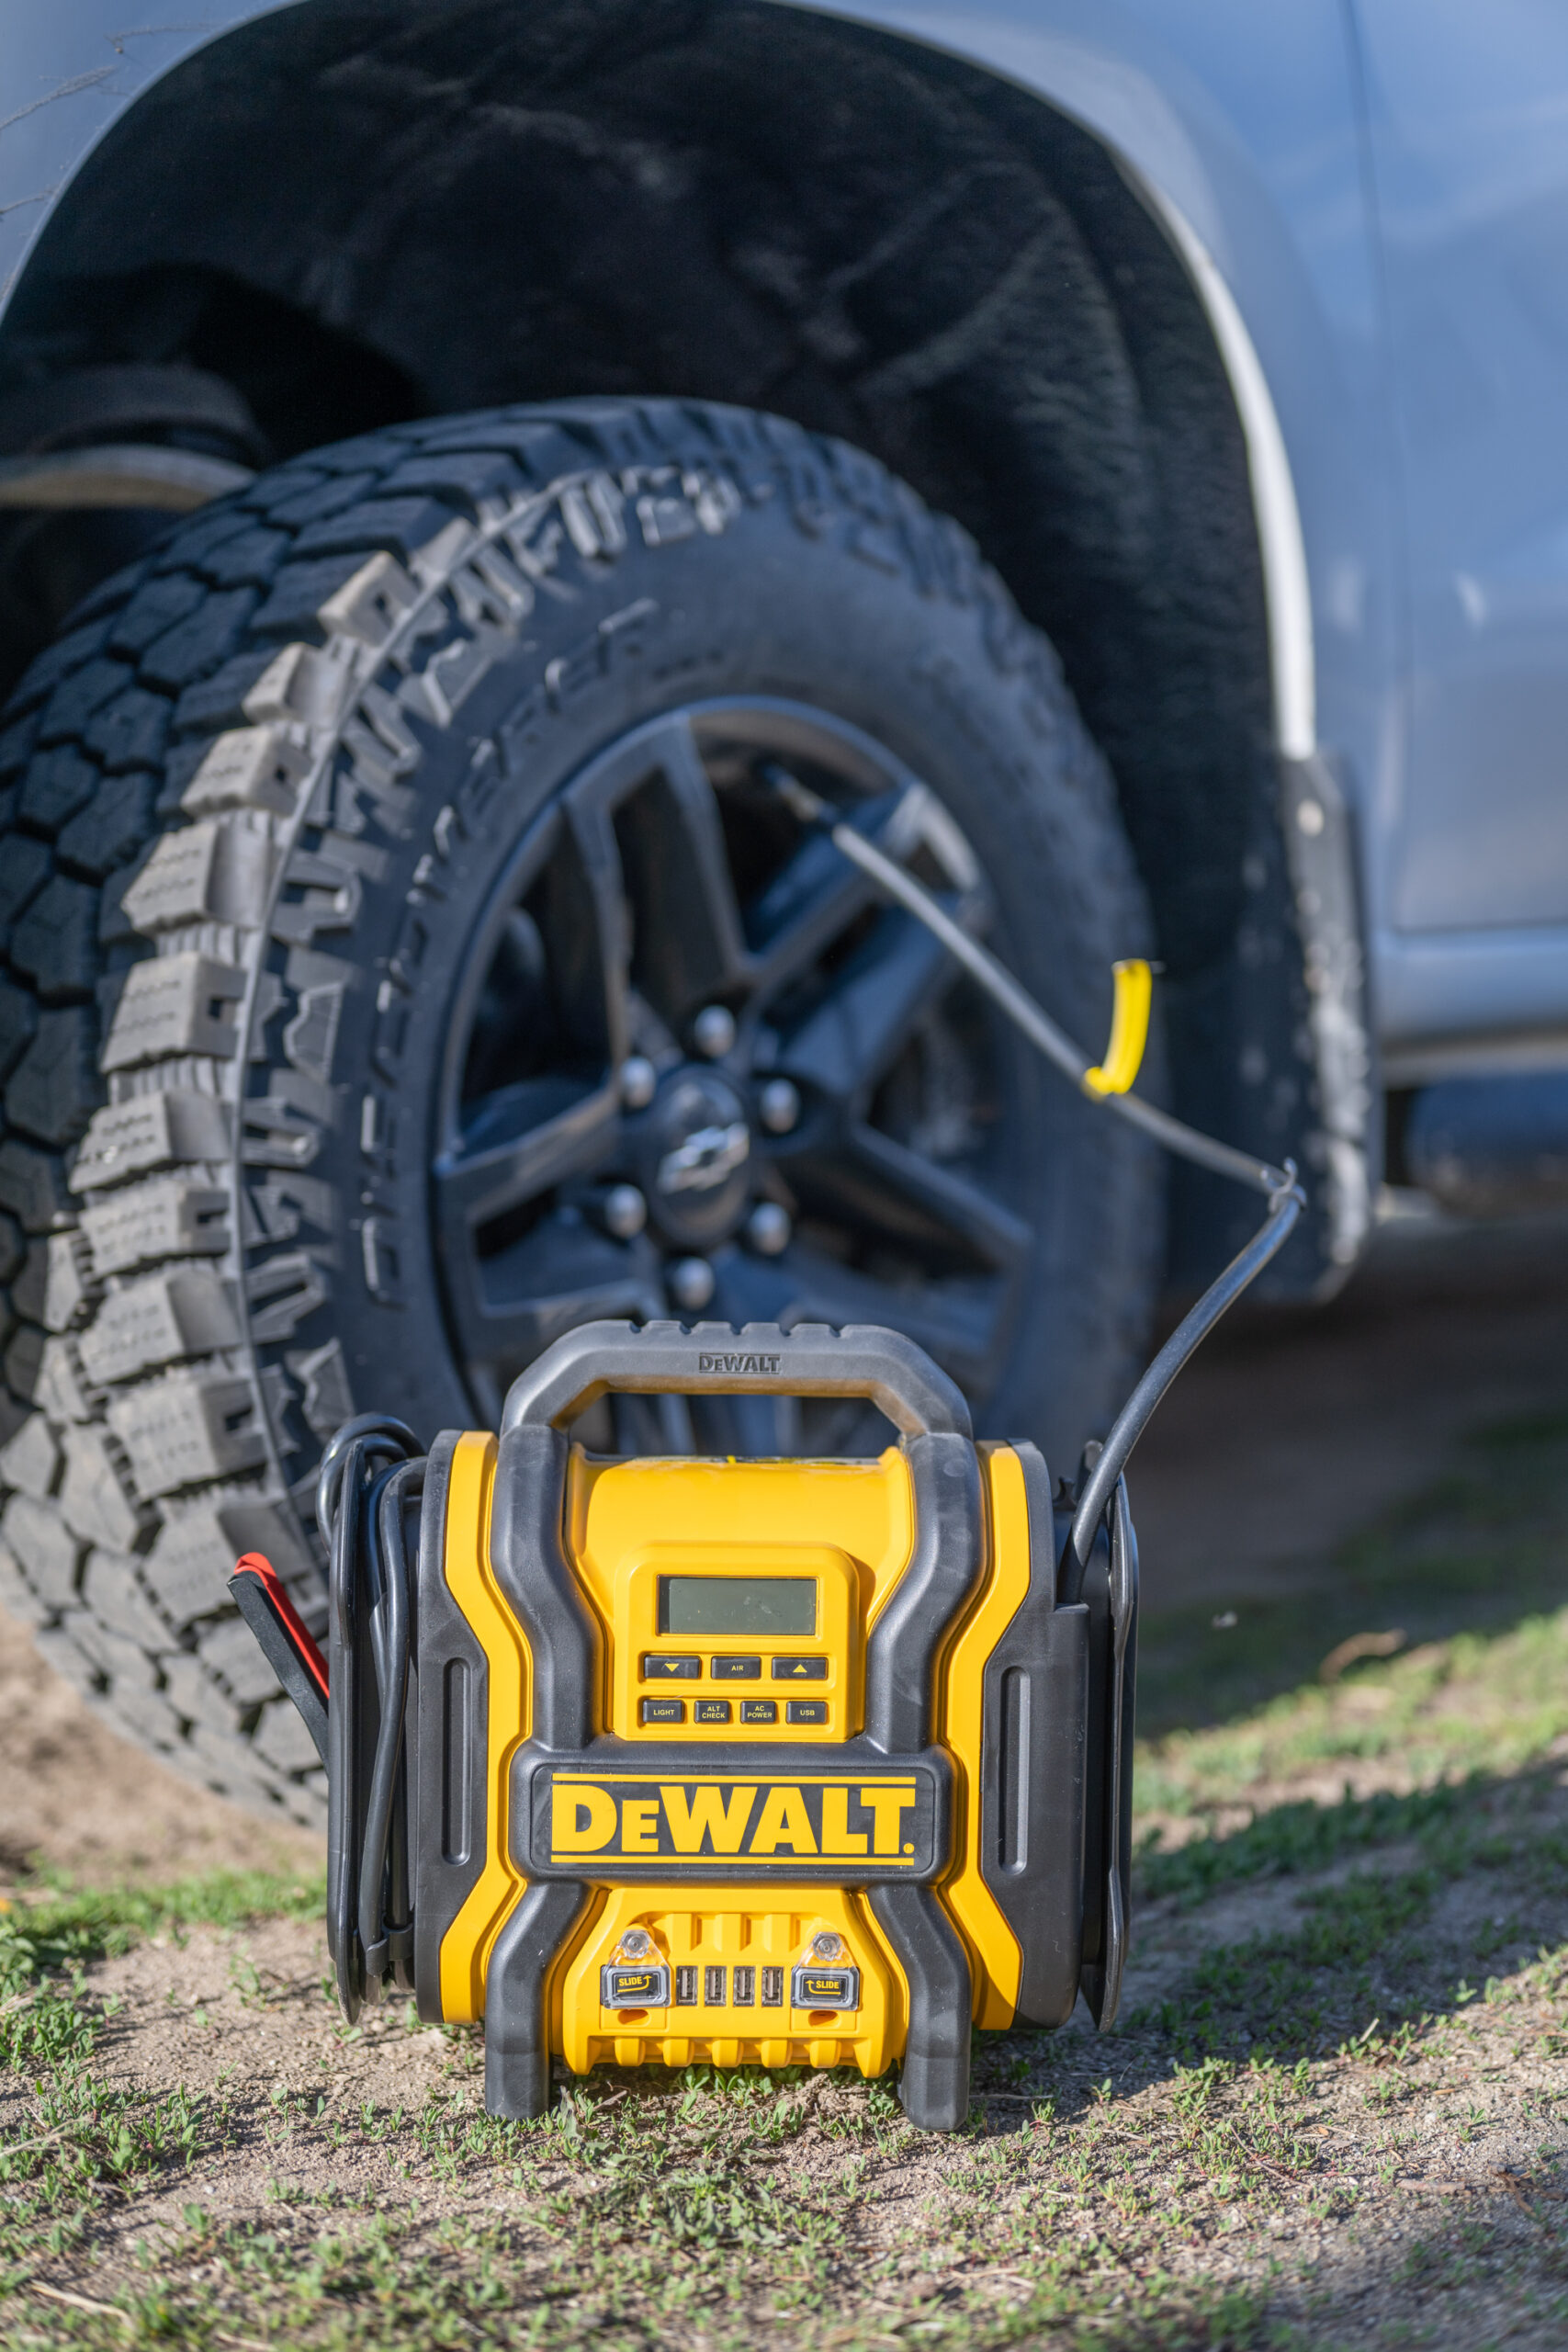 The DeWalt Power Station also includes an air compressor.